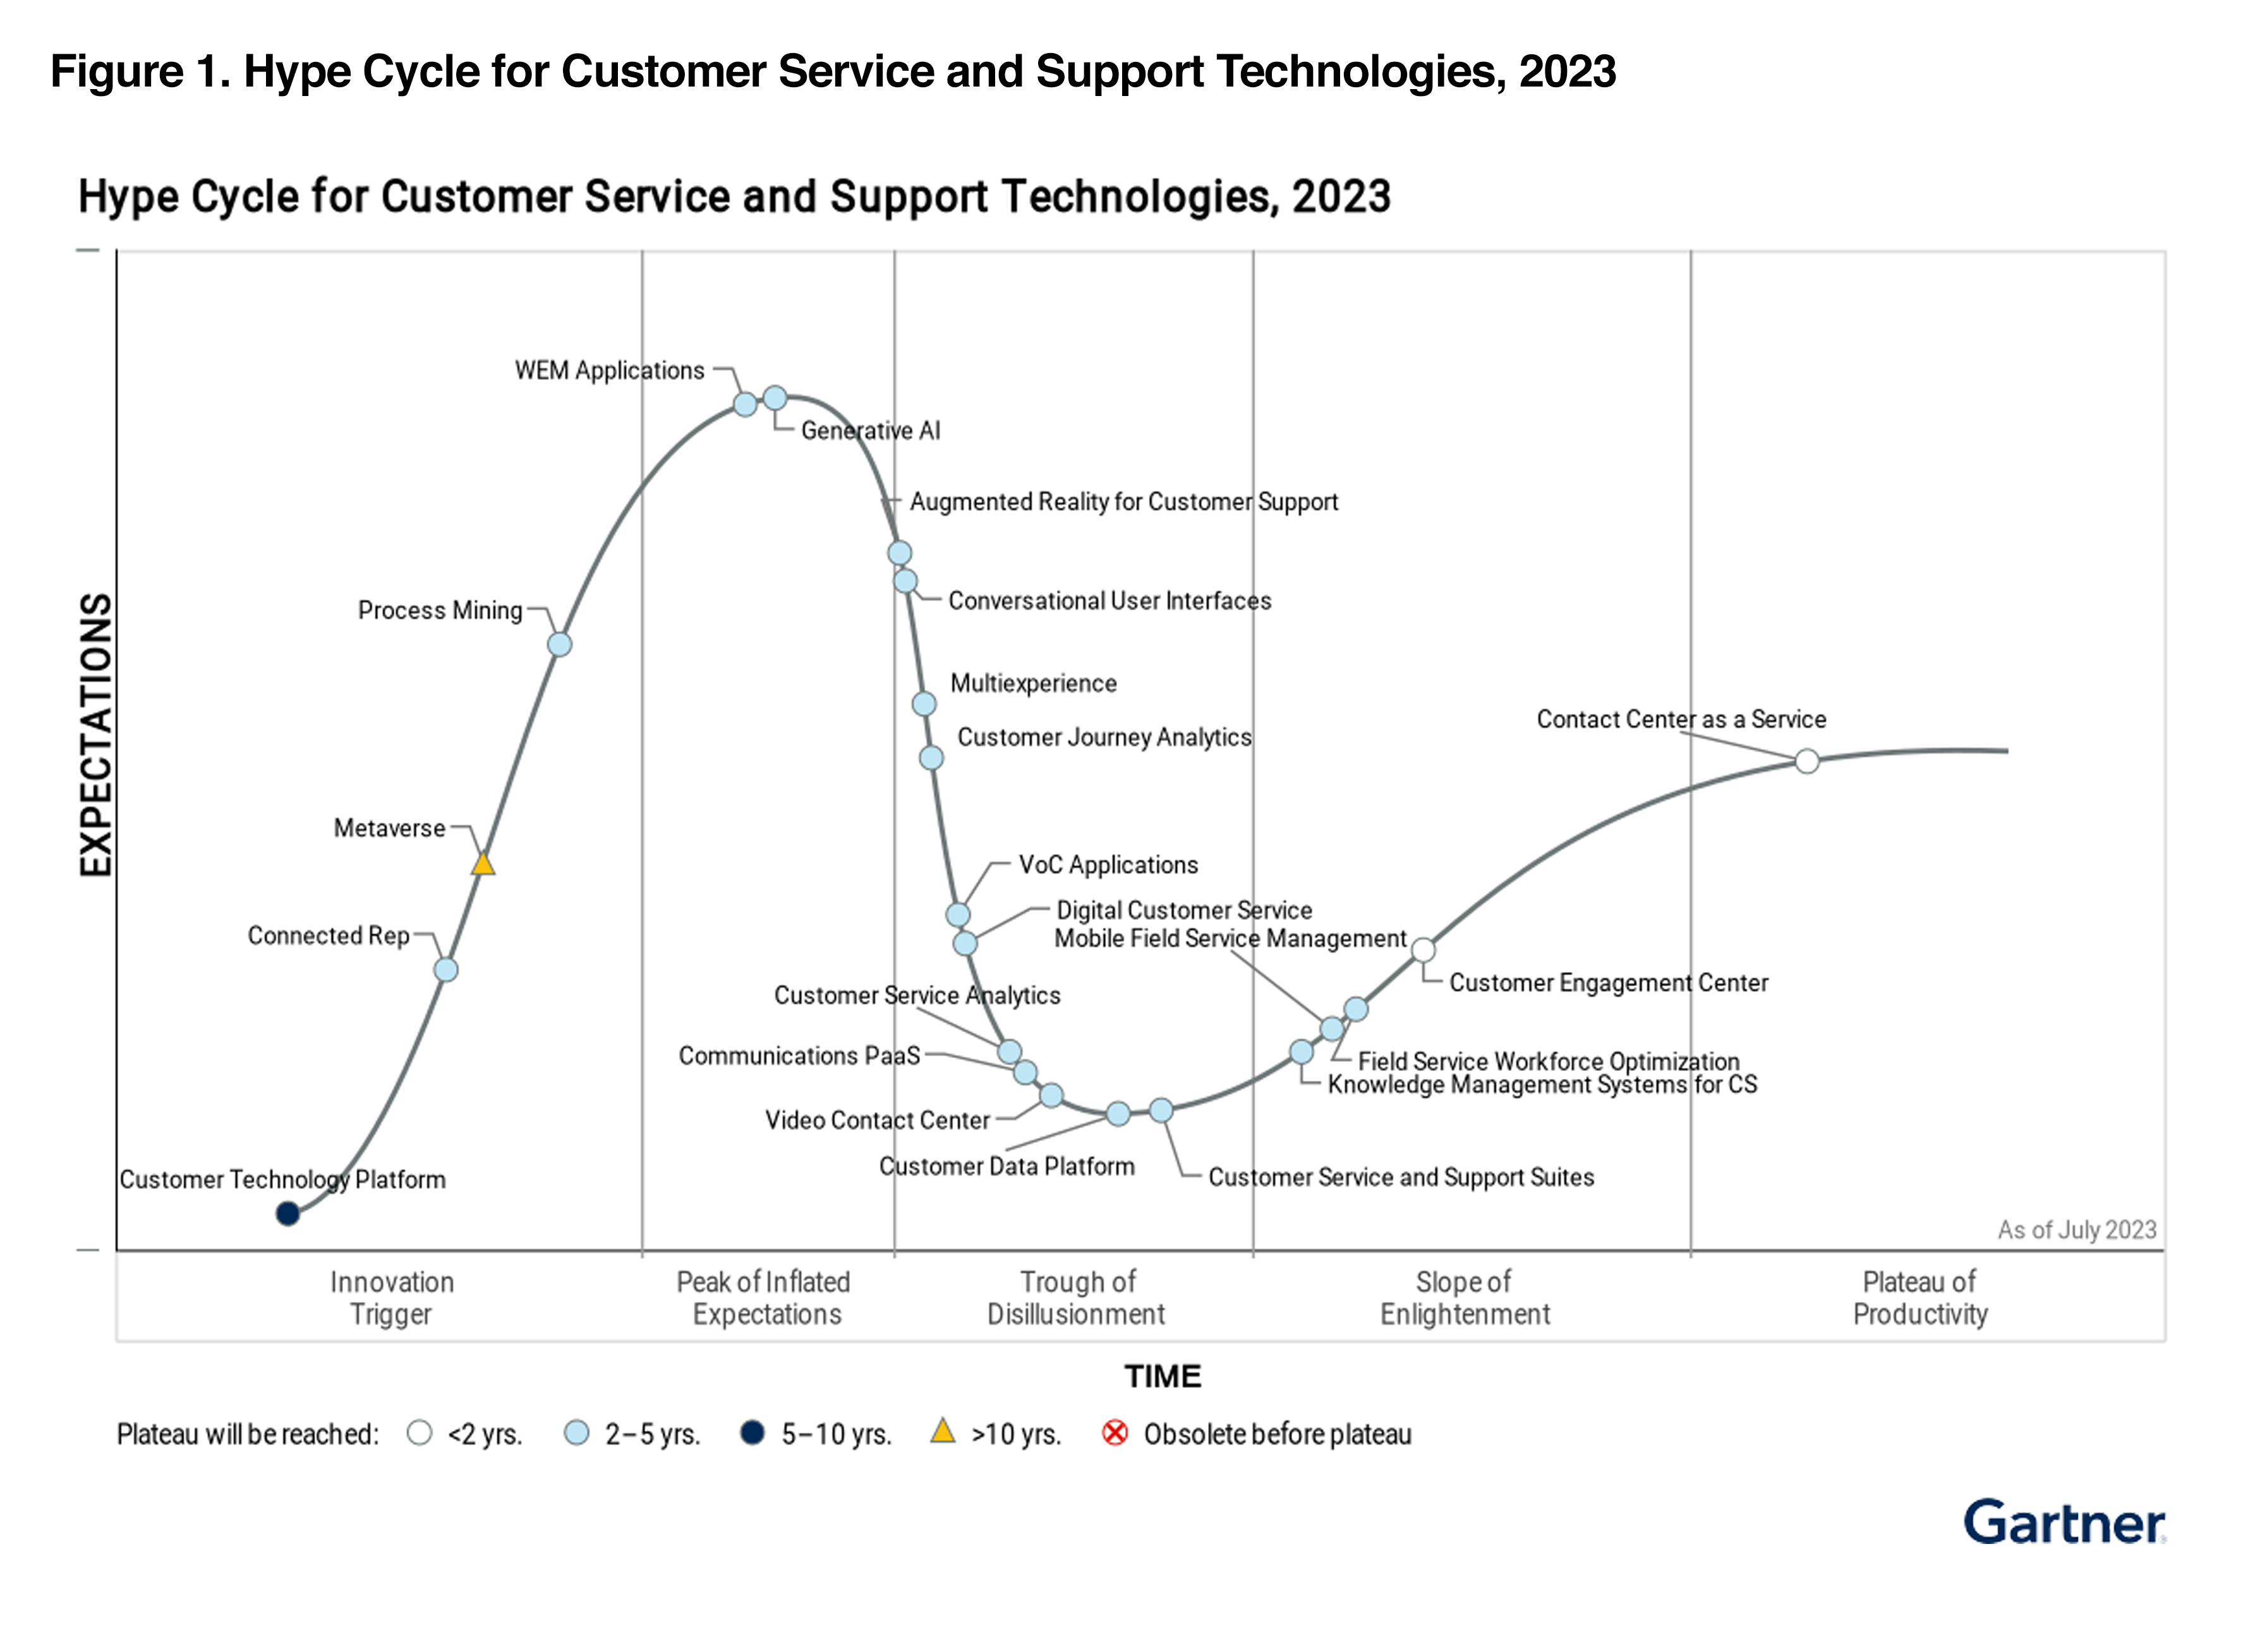 Gartner Hype Cycle, Customer Service and Support Technologies, 2023